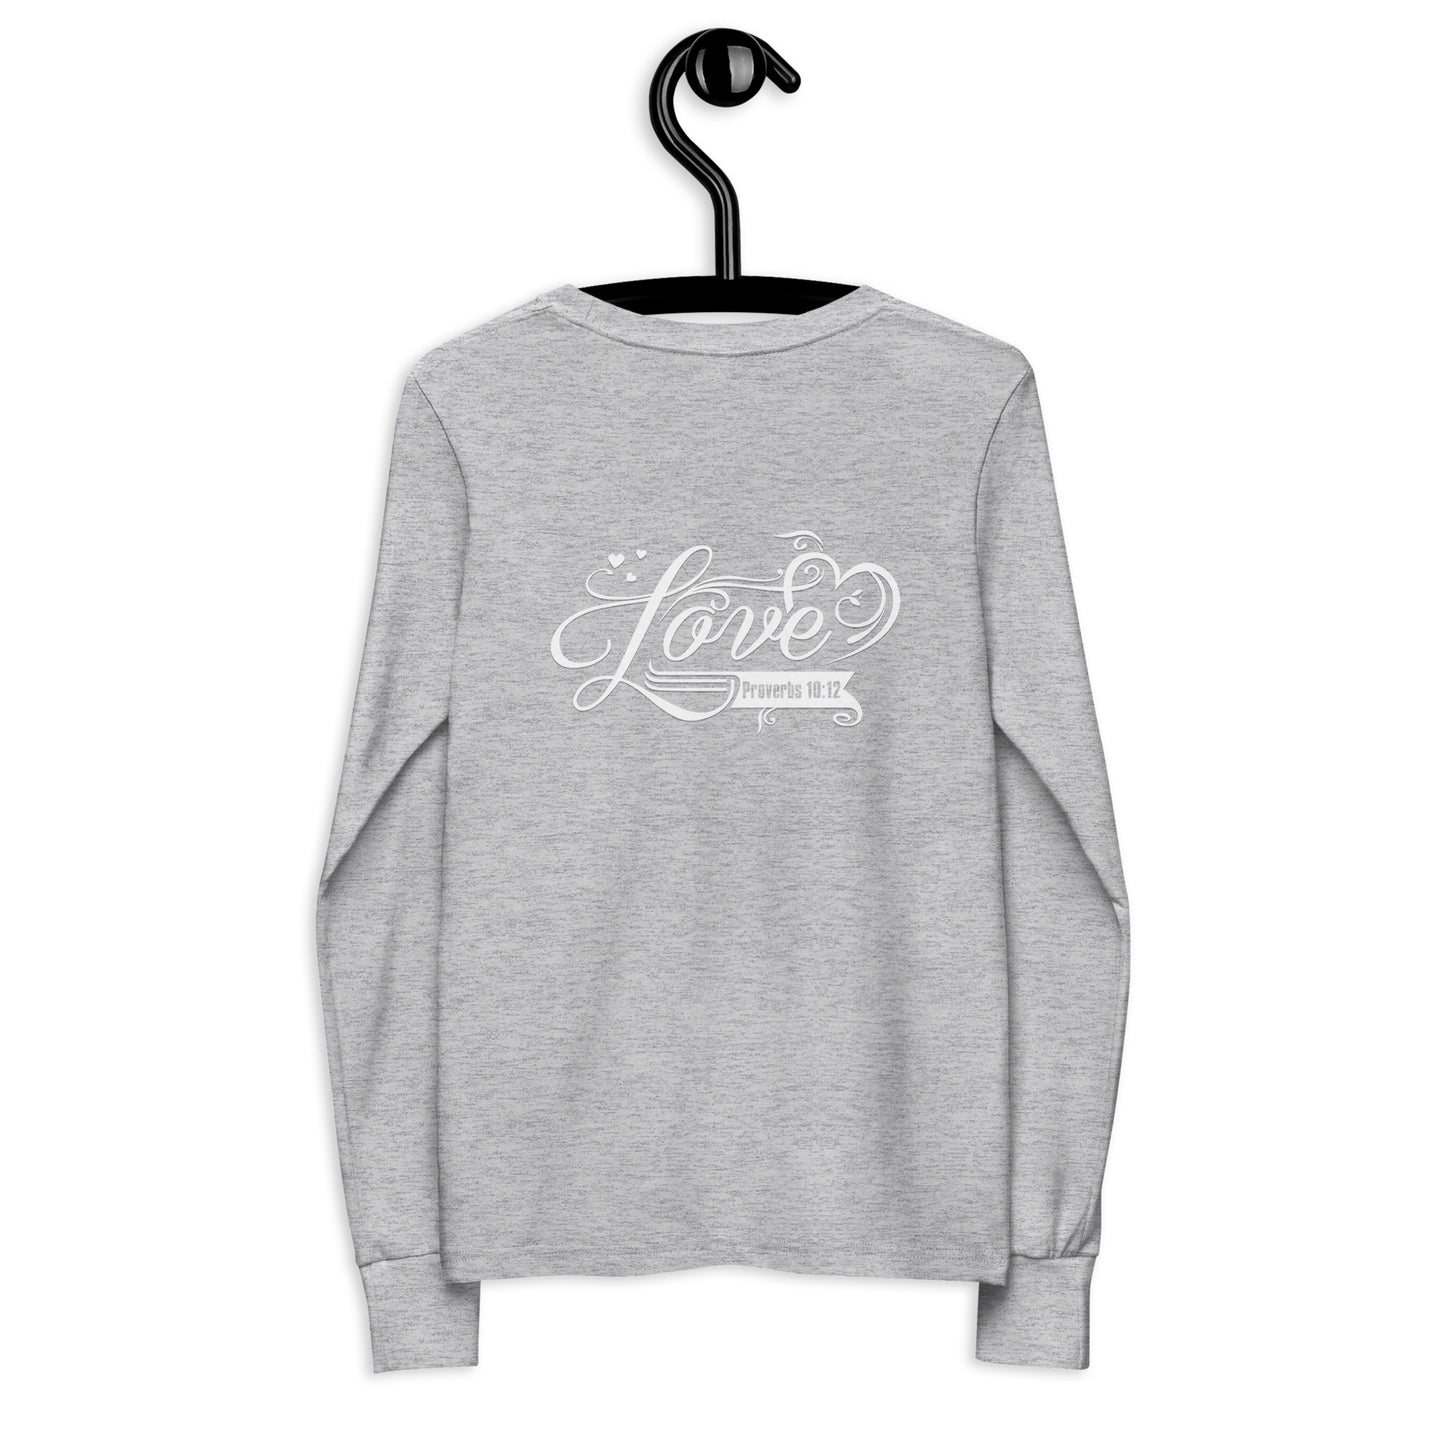 Love - Youth long sleeve tee - View All Colors